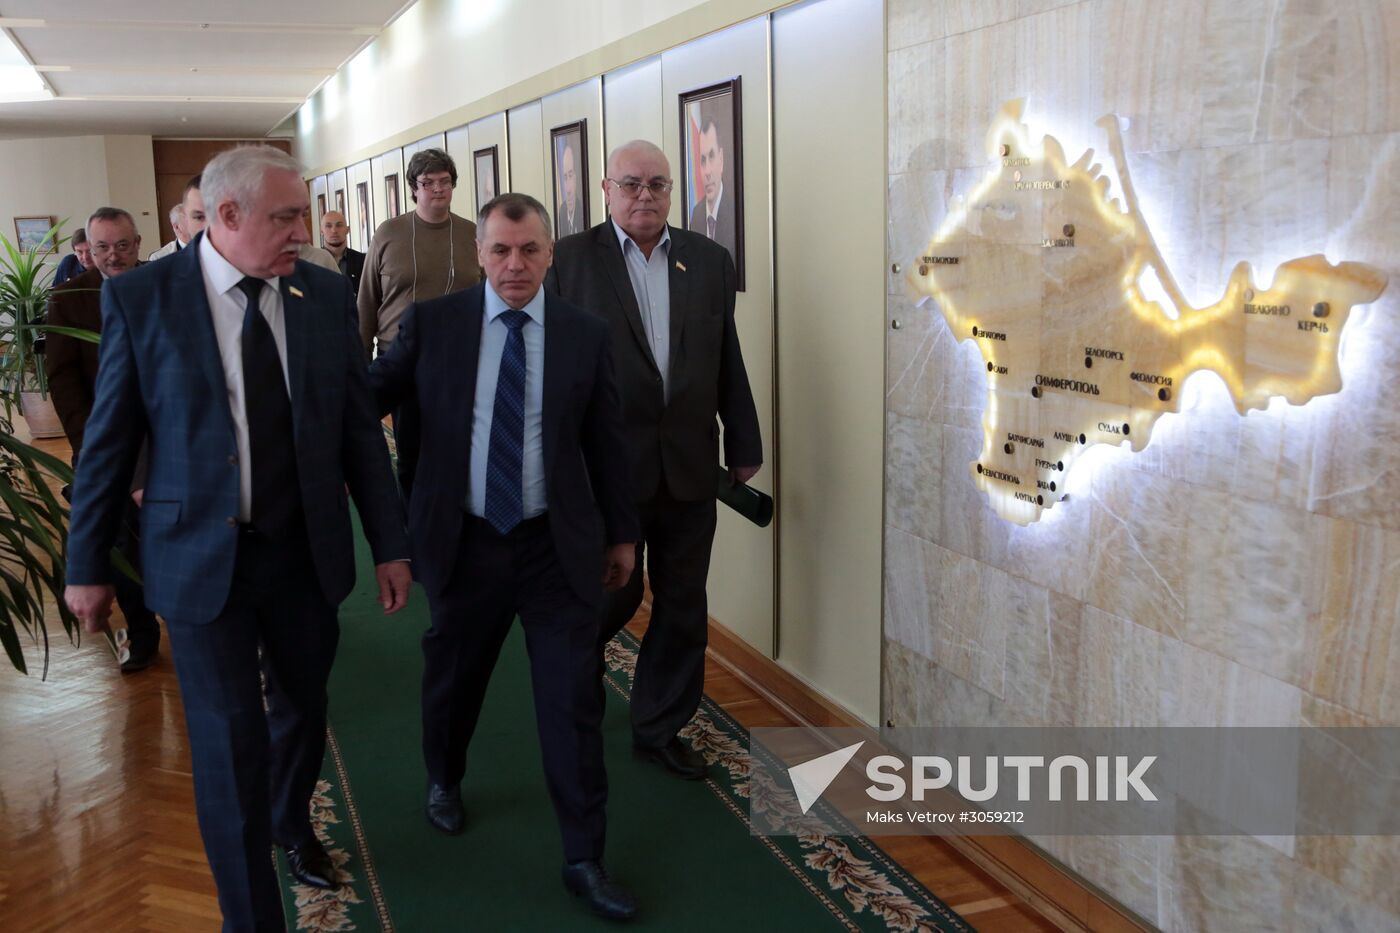 German delegation of politicians and business people arrives in Crimea